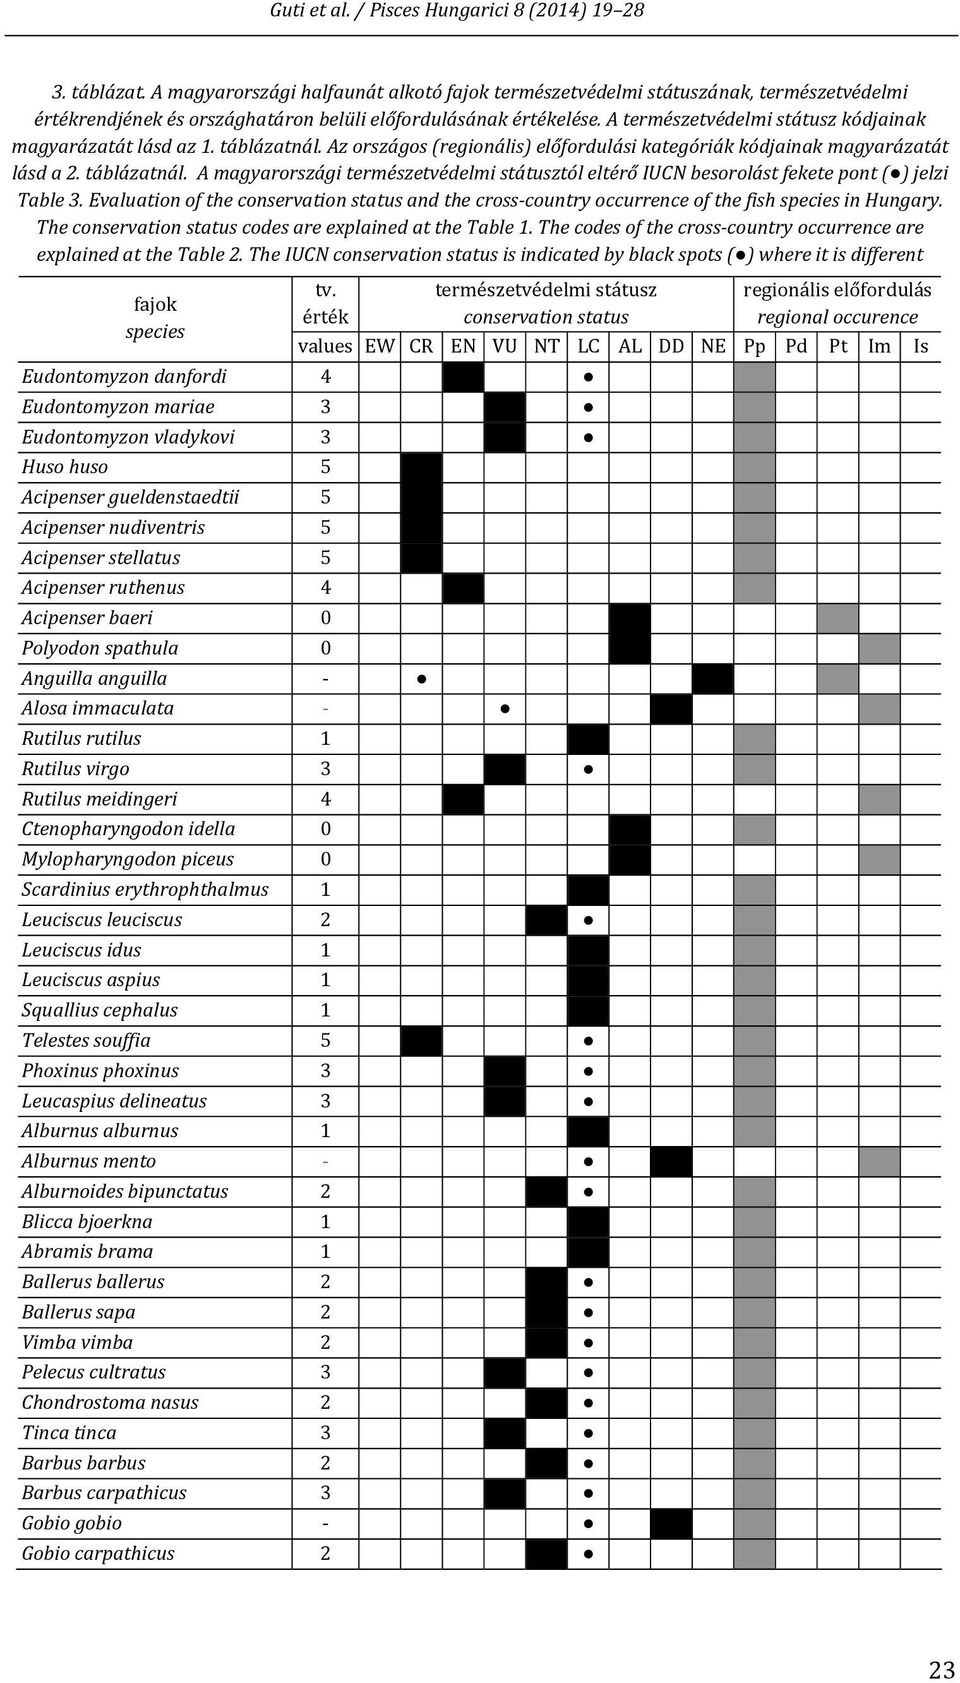 Evaluation of the conservation status and the cross country occurrence of the fish species in Hungary. The conservation status codes are explained at the Table 1.